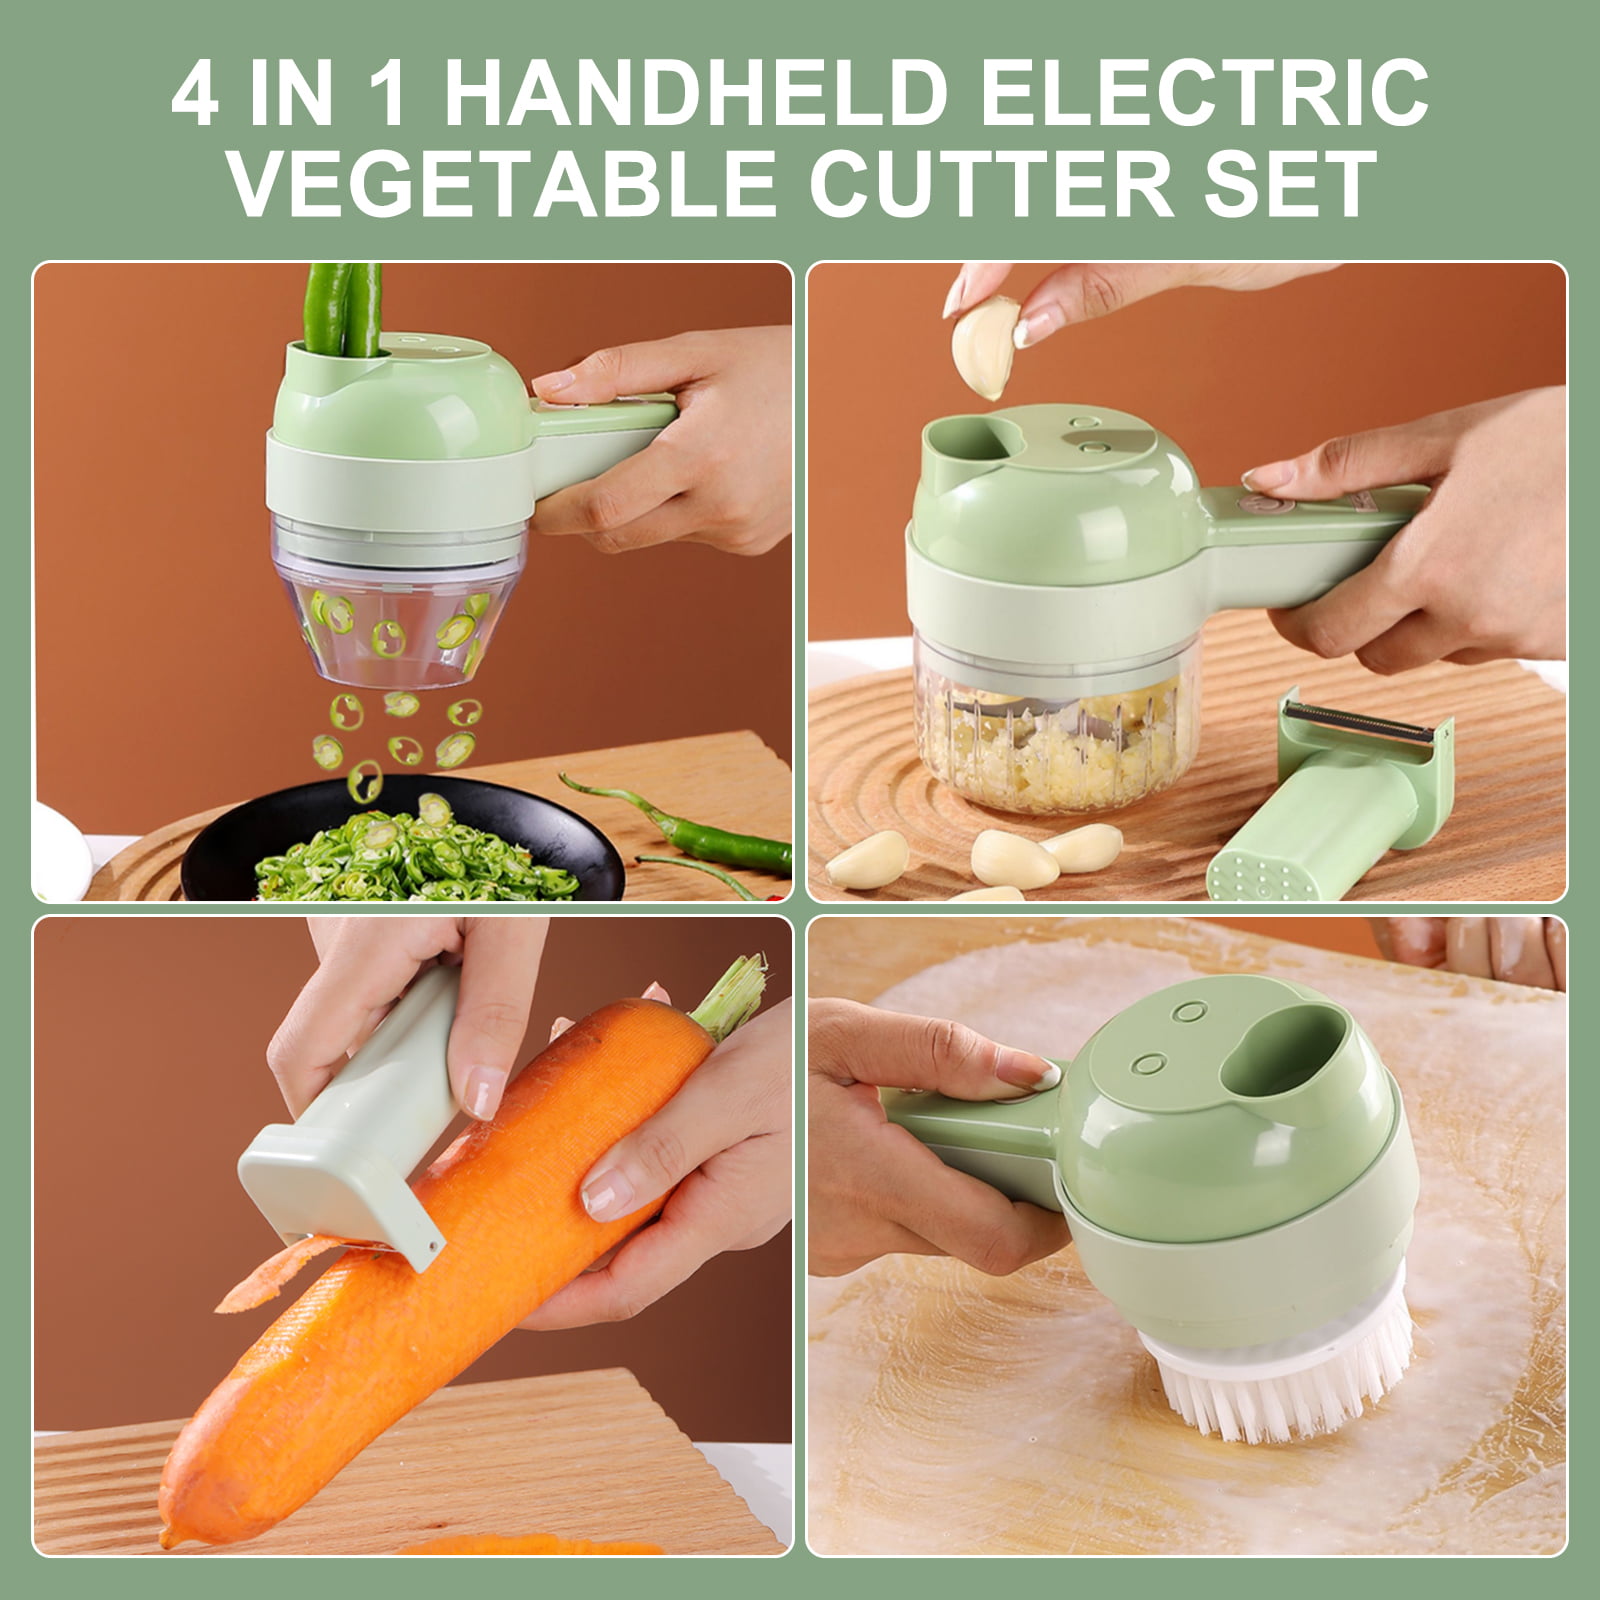 Lieonvis 4 in 1 Handheld Electric Vegetable Cutter Set